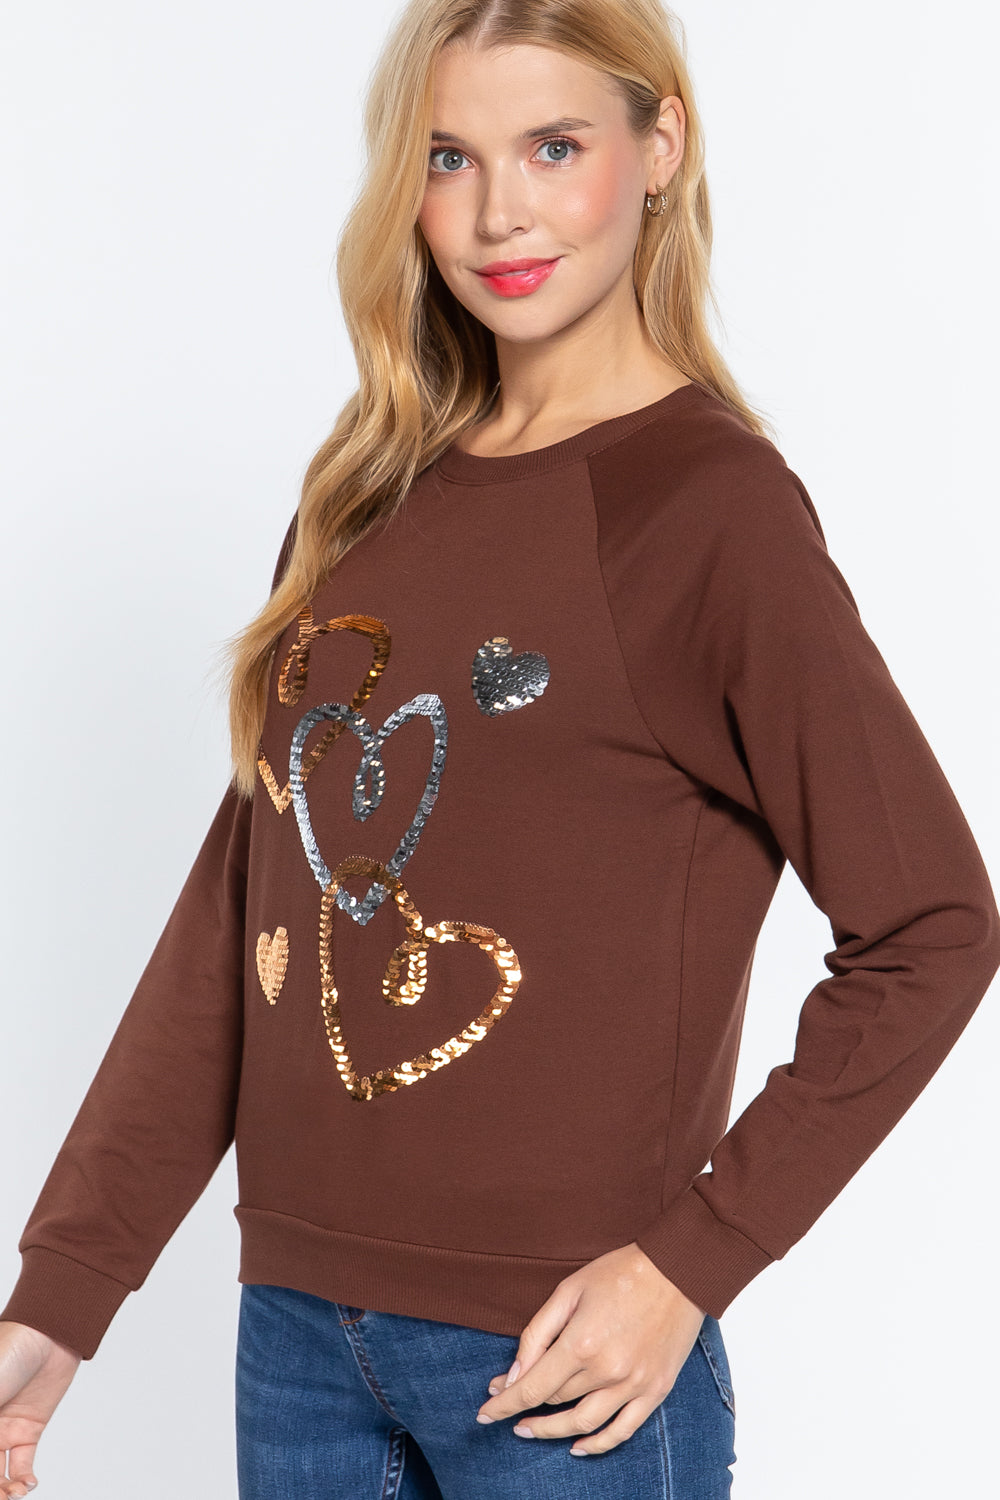 Sequins French Terry Pullover Top Sequins French Terry Pullover Top - M&R CORNER M&R CORNER